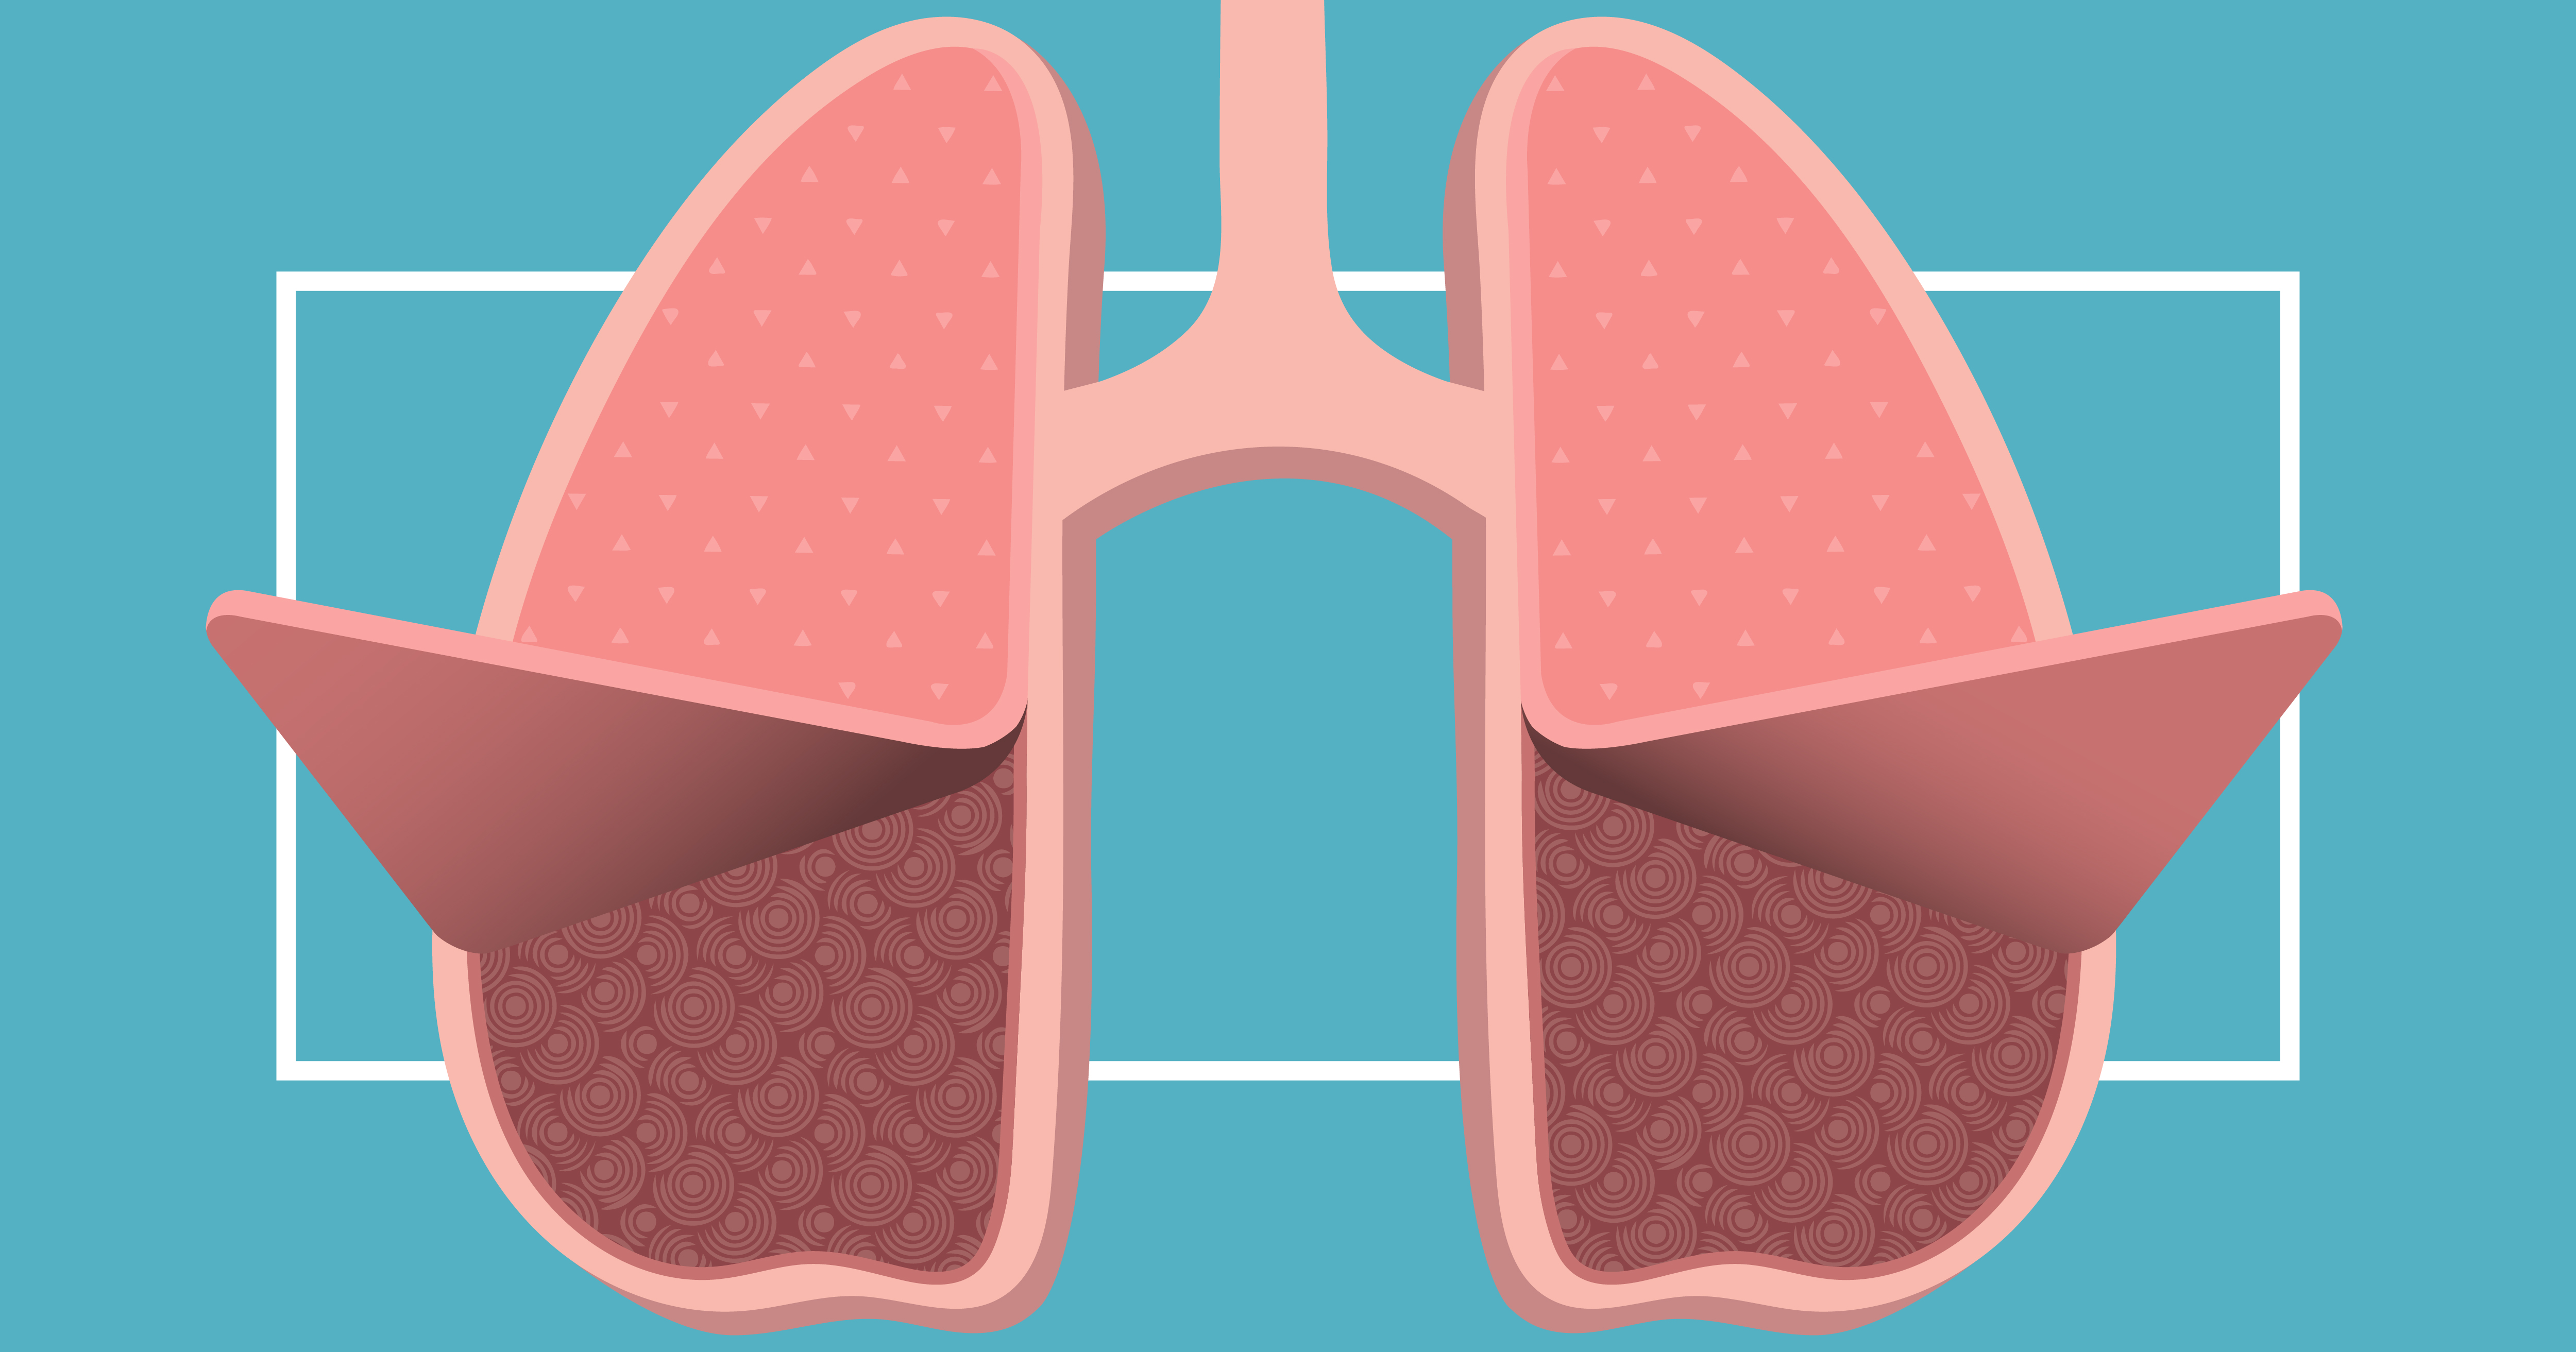 lungs clipart respiratory problem